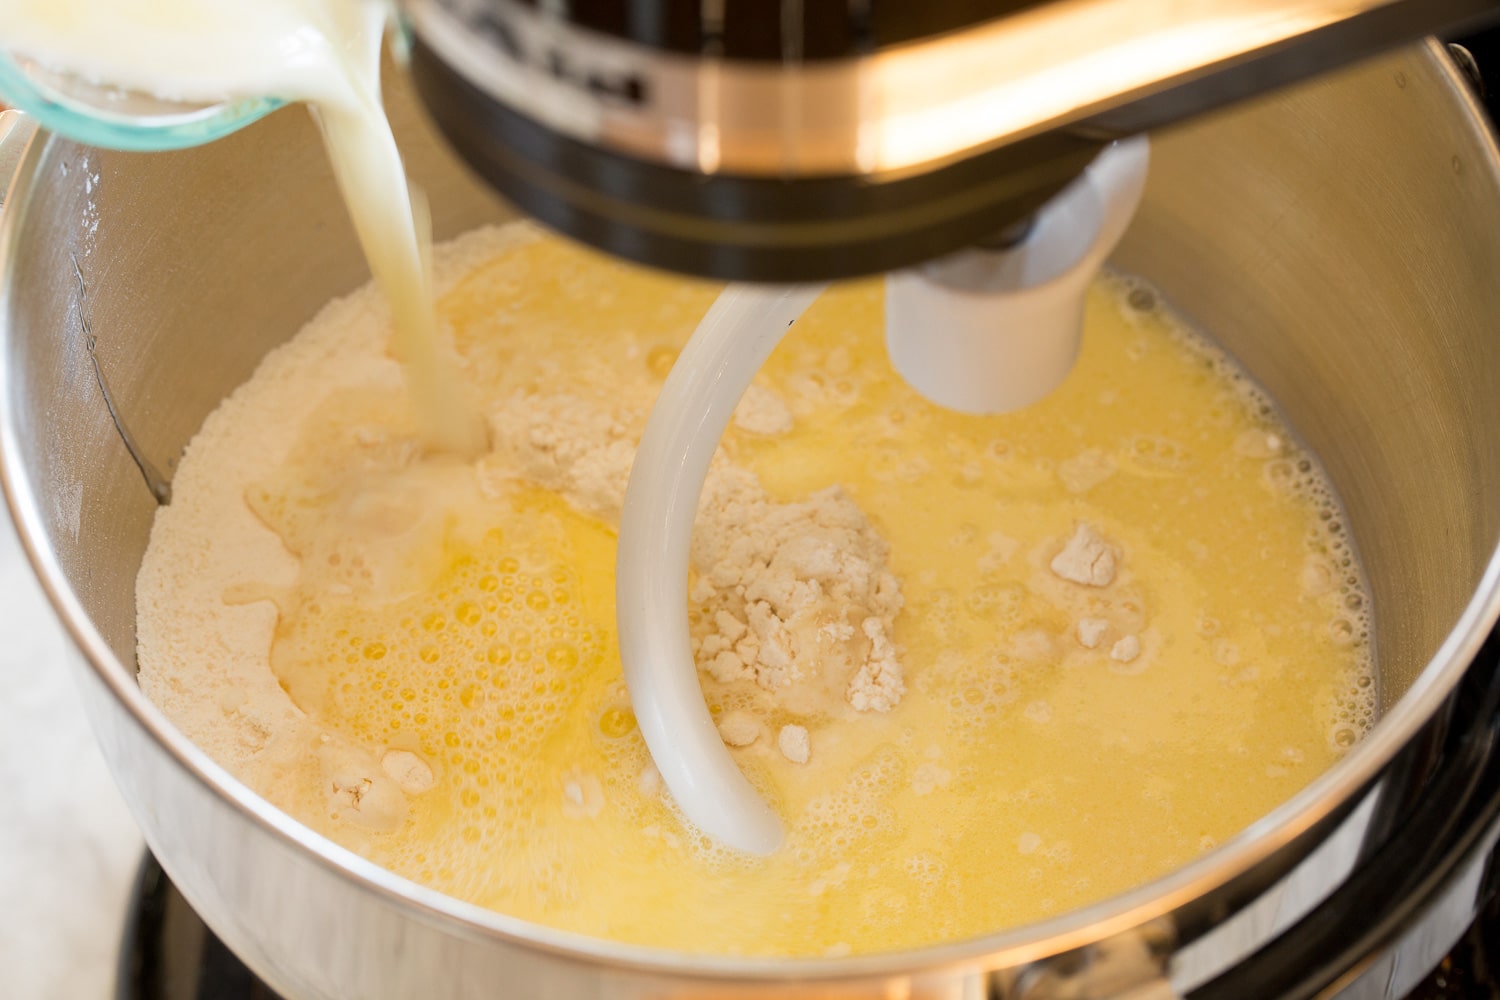 Dry and wet ingredients being mixed for dough.